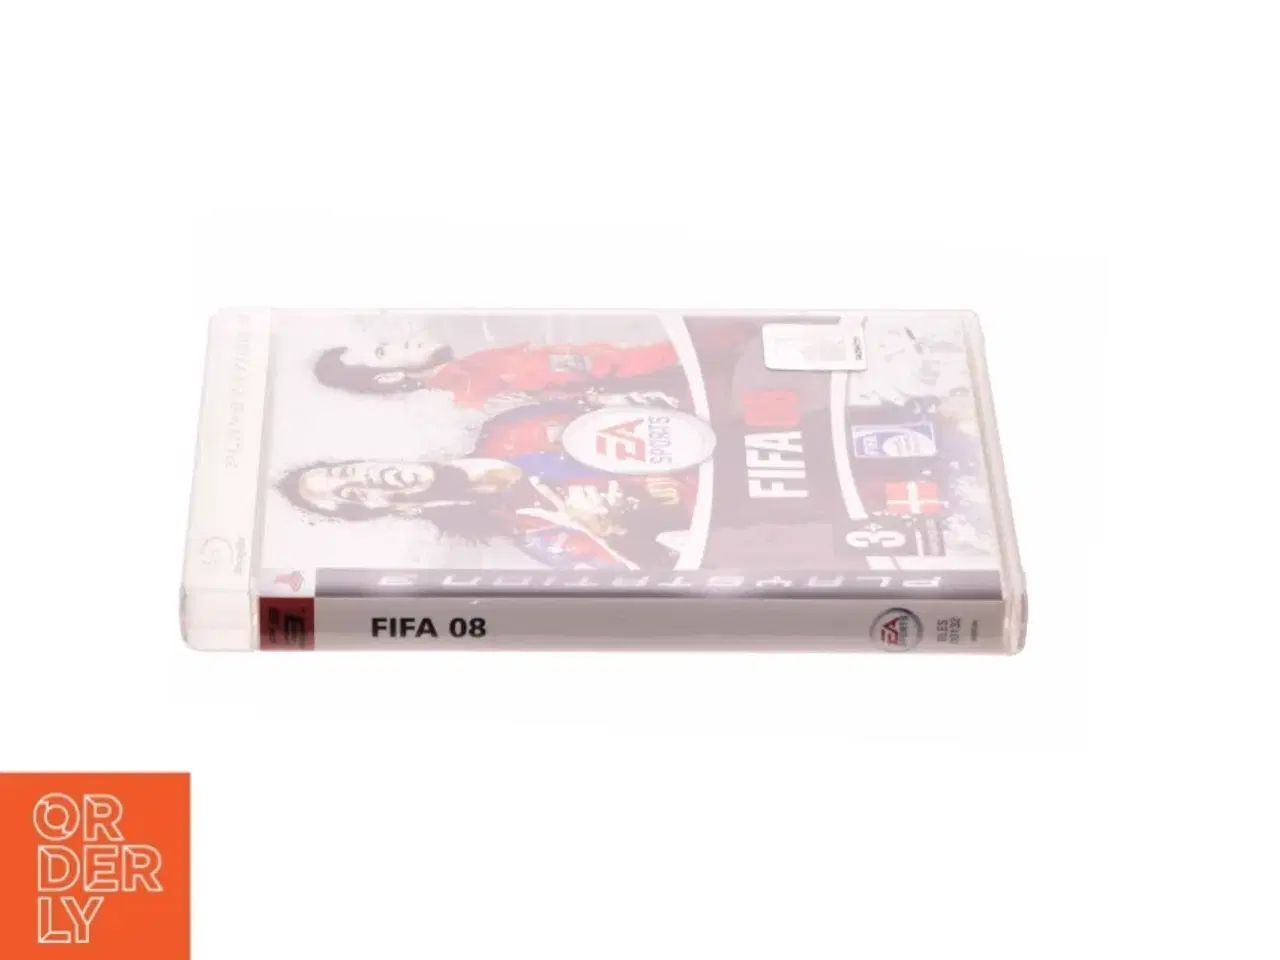 Billede 3 - FIFA 08 (Playstation 3) English in Game Speech and Text, Dansk Manual fra DVD